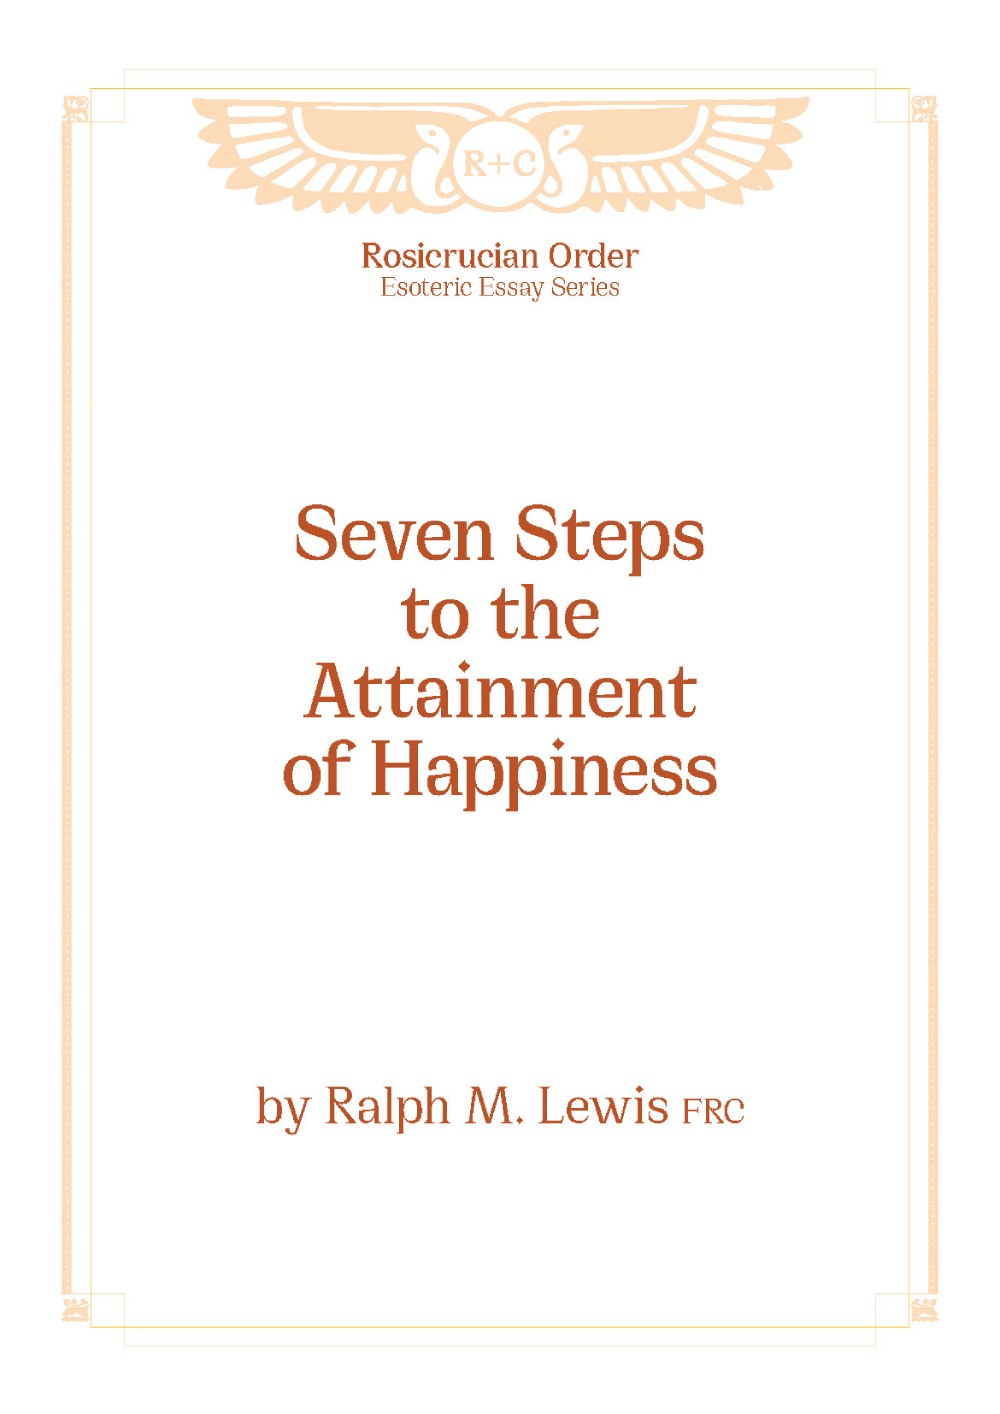 Esoteric Essays - Seven Steps to Attainment of Happiness